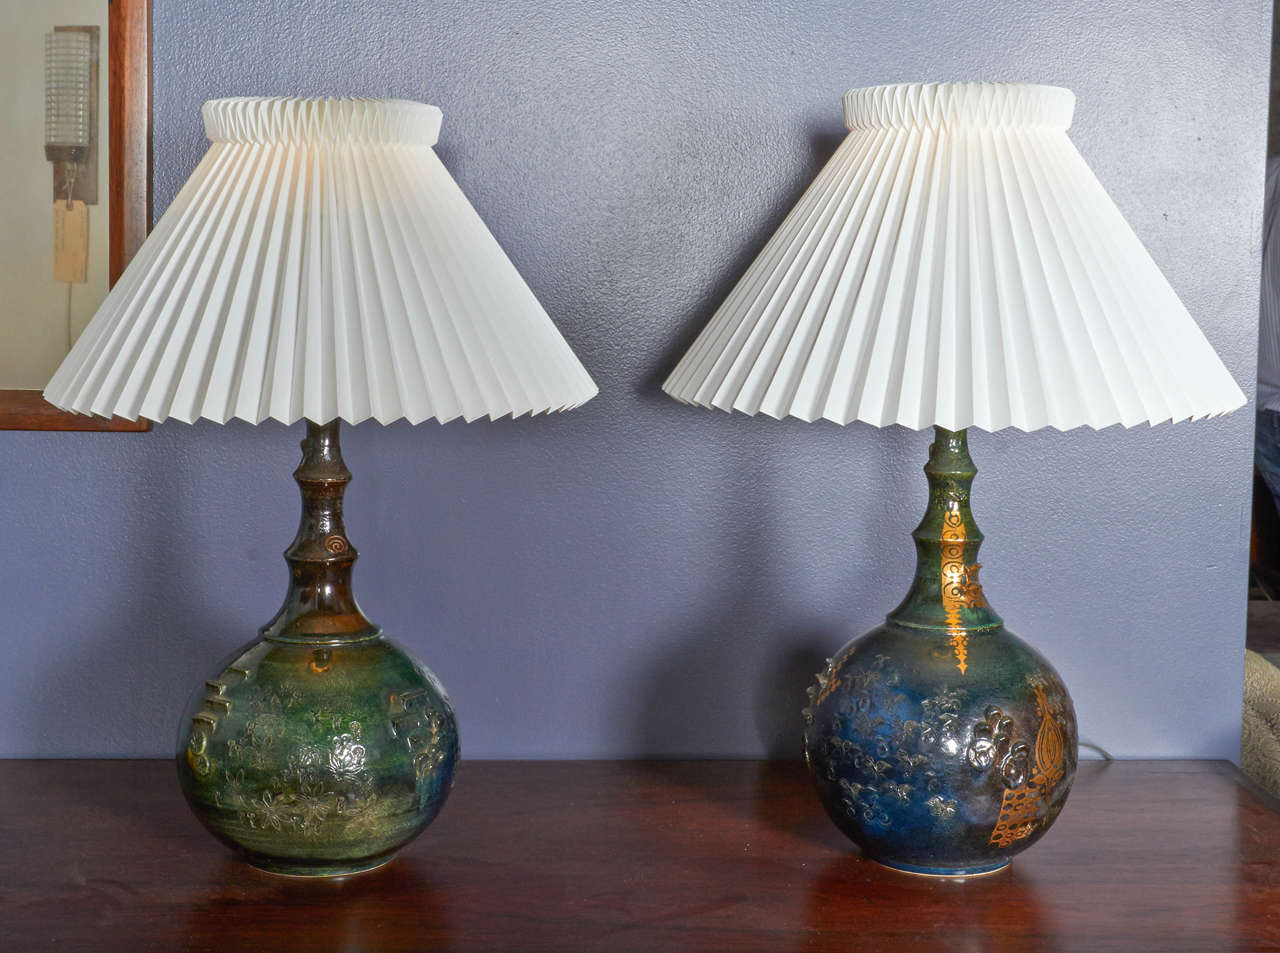 Vintage 1960s Keramic Table Lamps by Bjorn Wiinblad

This pair of Ceramic Lamps are in like new condition. The lamp is hand molded with random shapes carved into the clay, with gold leafing also placed randomly. One lamp is also more green than